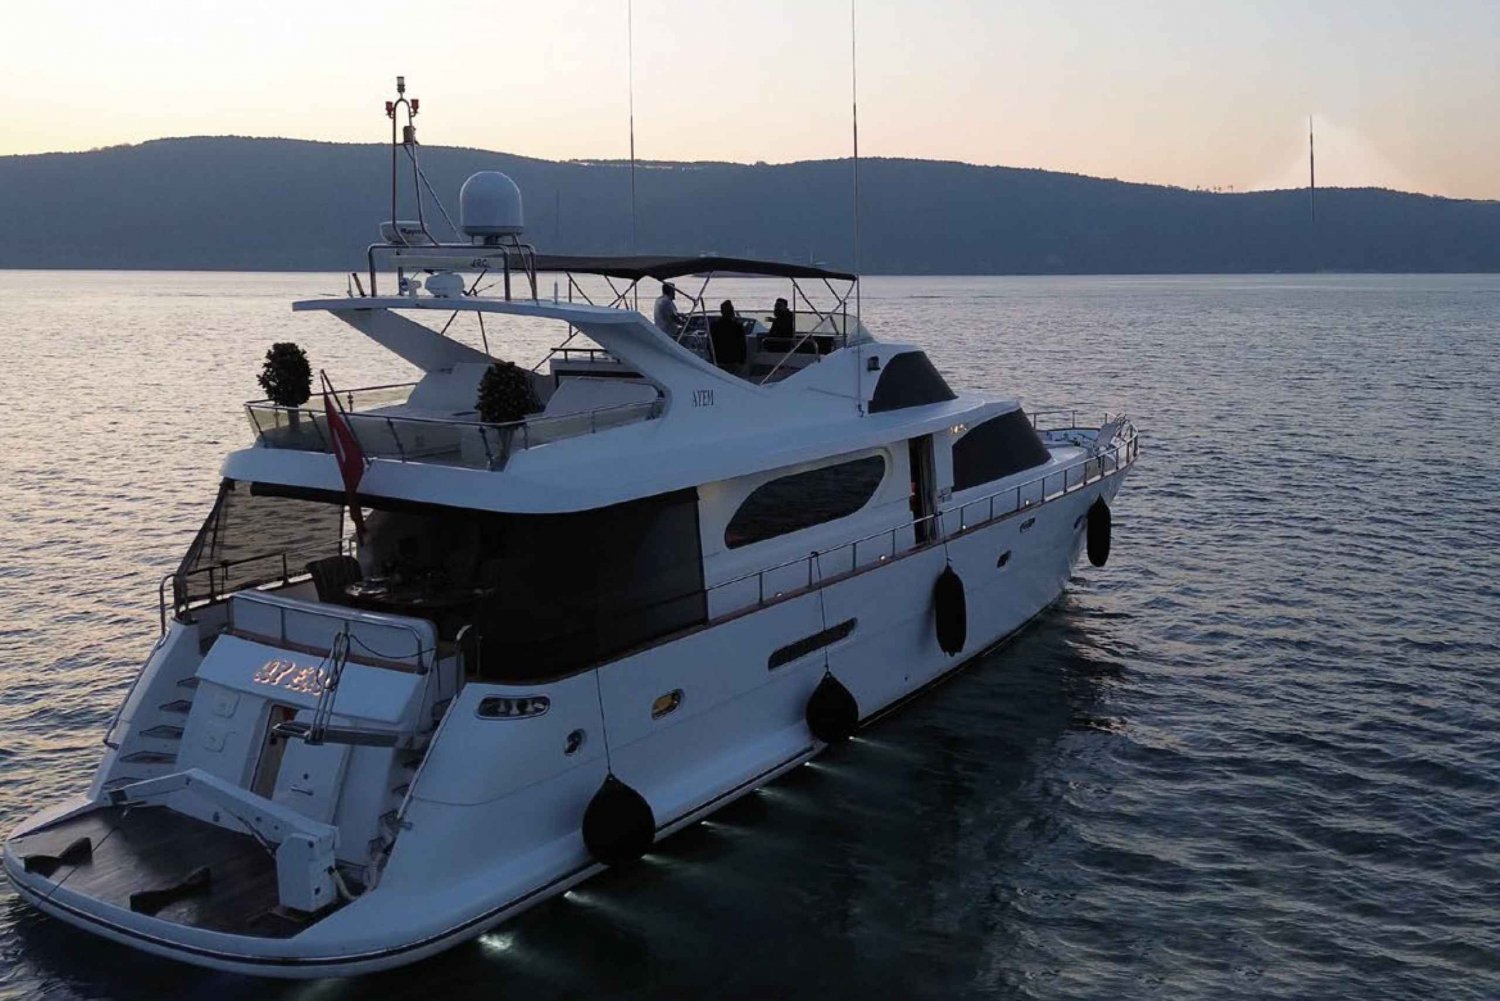 From Torba: Bodrum Coast Private Yacht Tour with Swim Stops